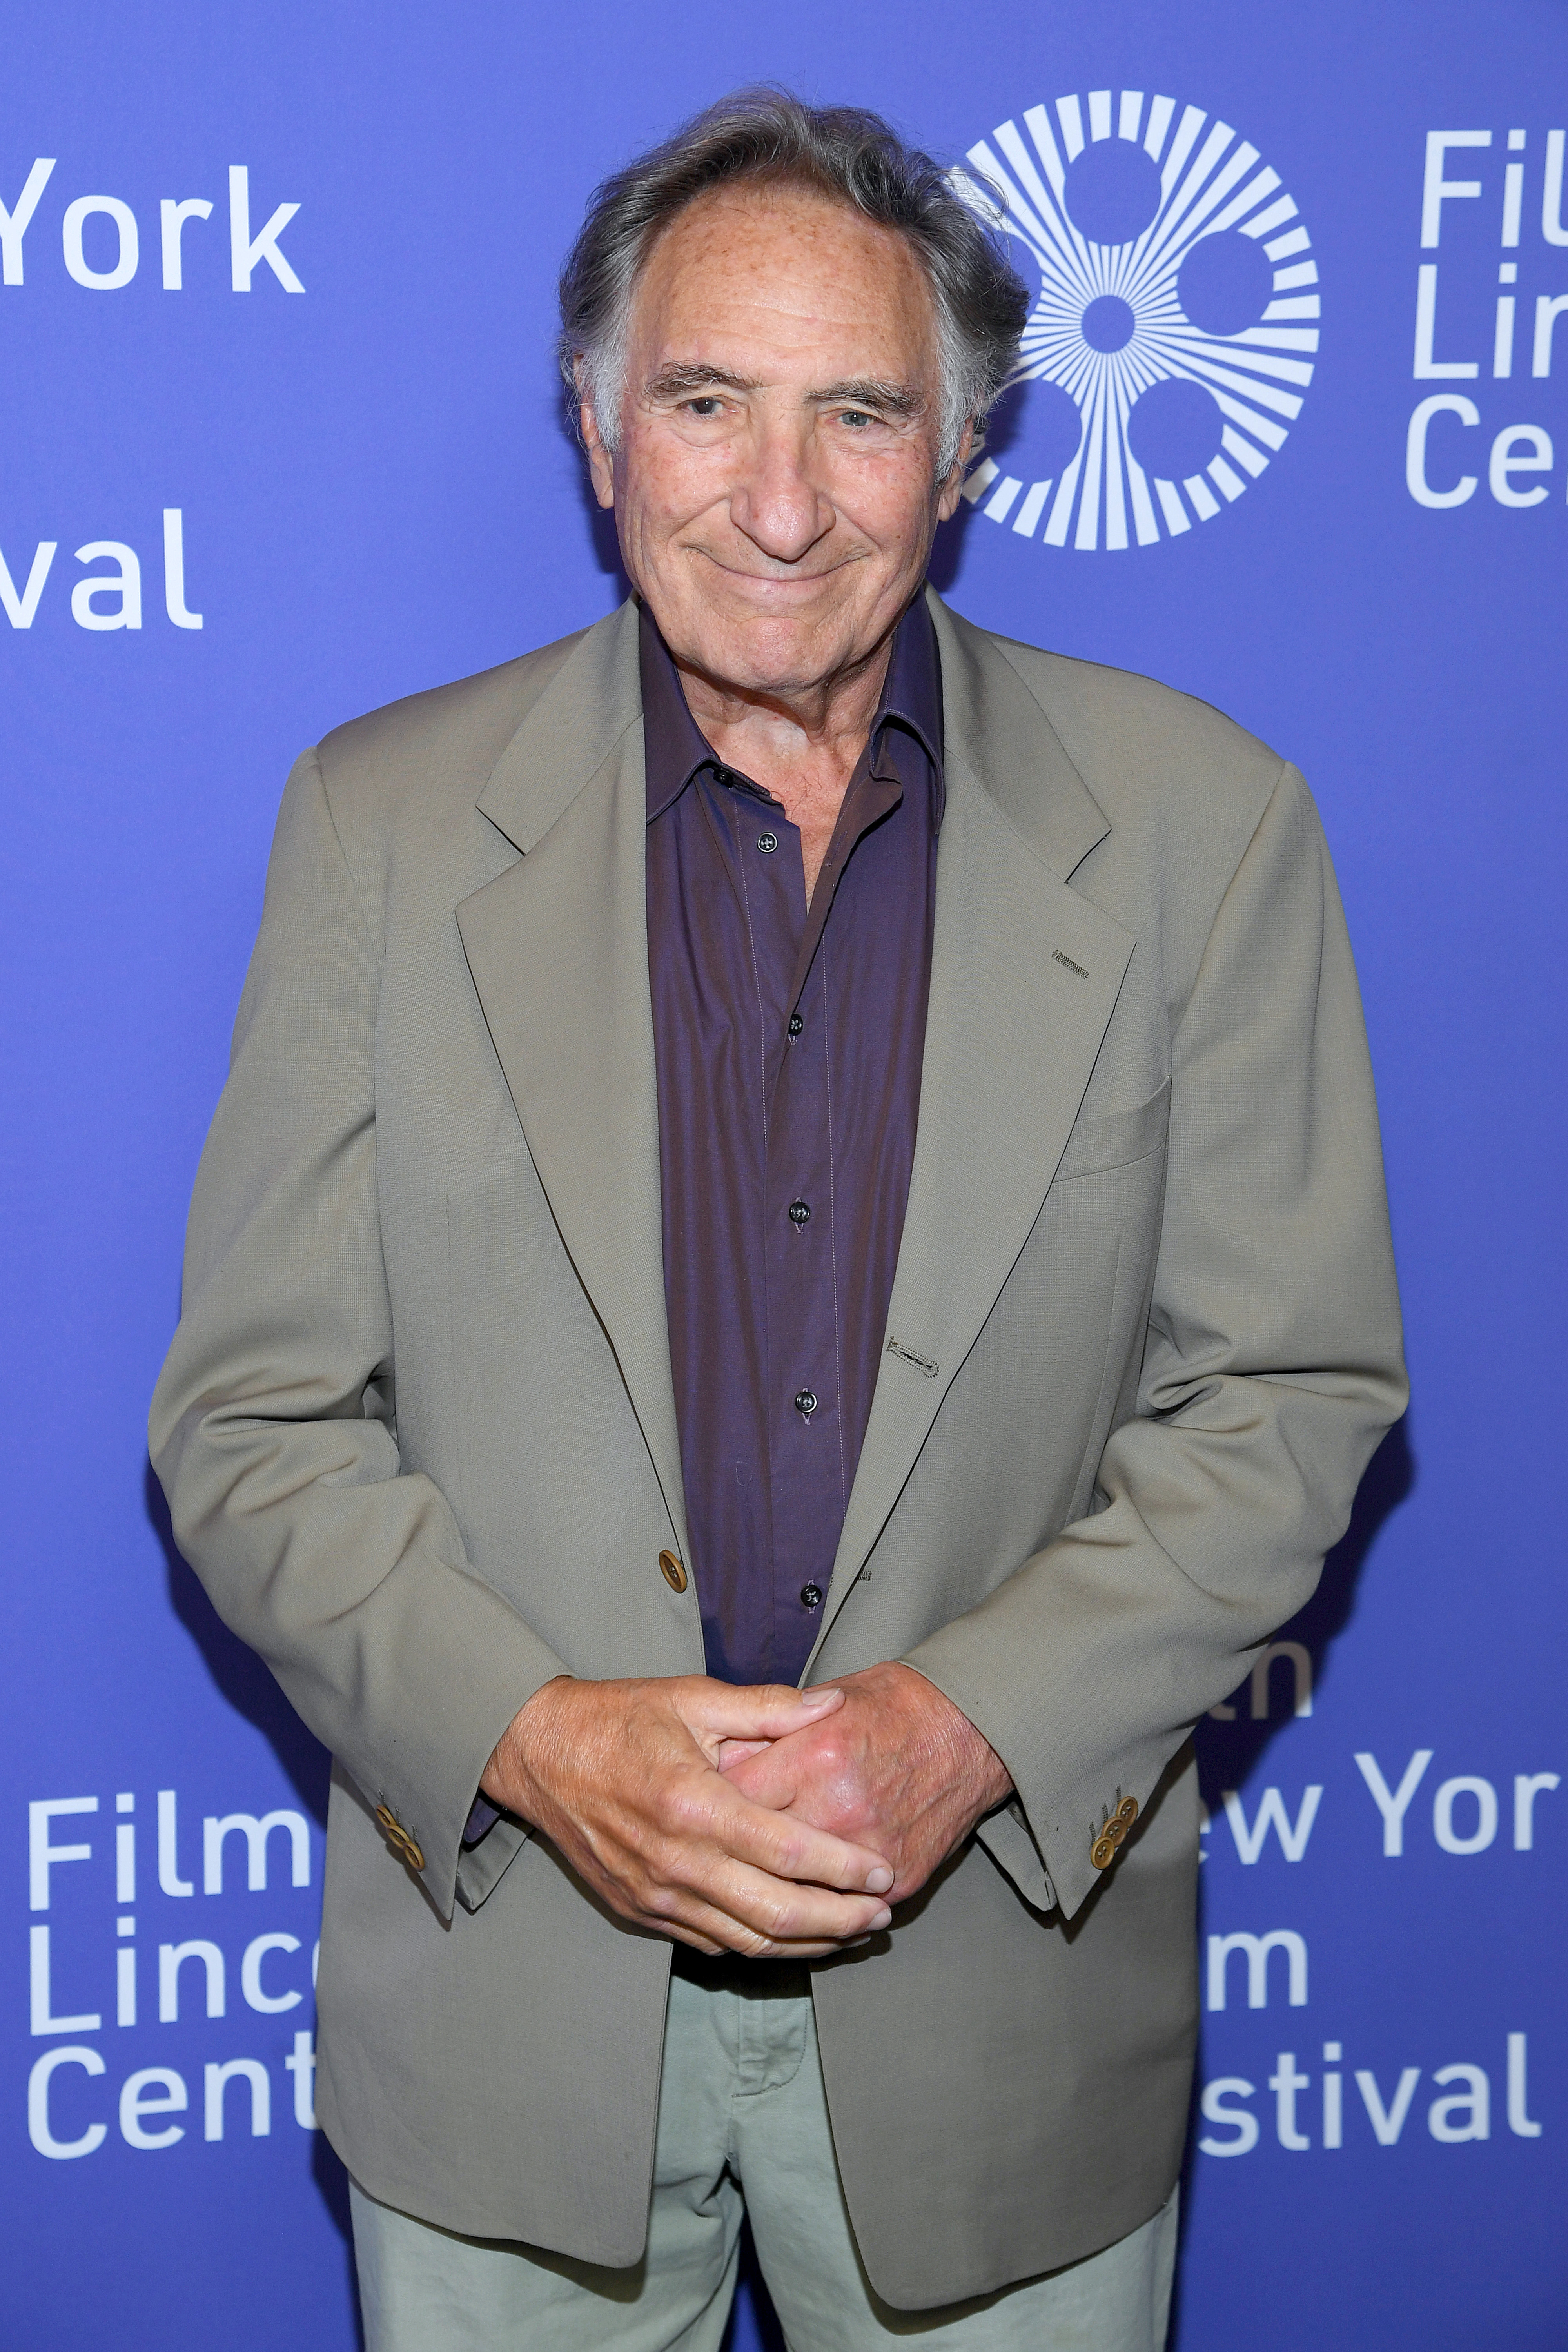 Judd Hirsch at the "Uncut Gems" premiere during the 57th New York Film Festival | Source: Getty images